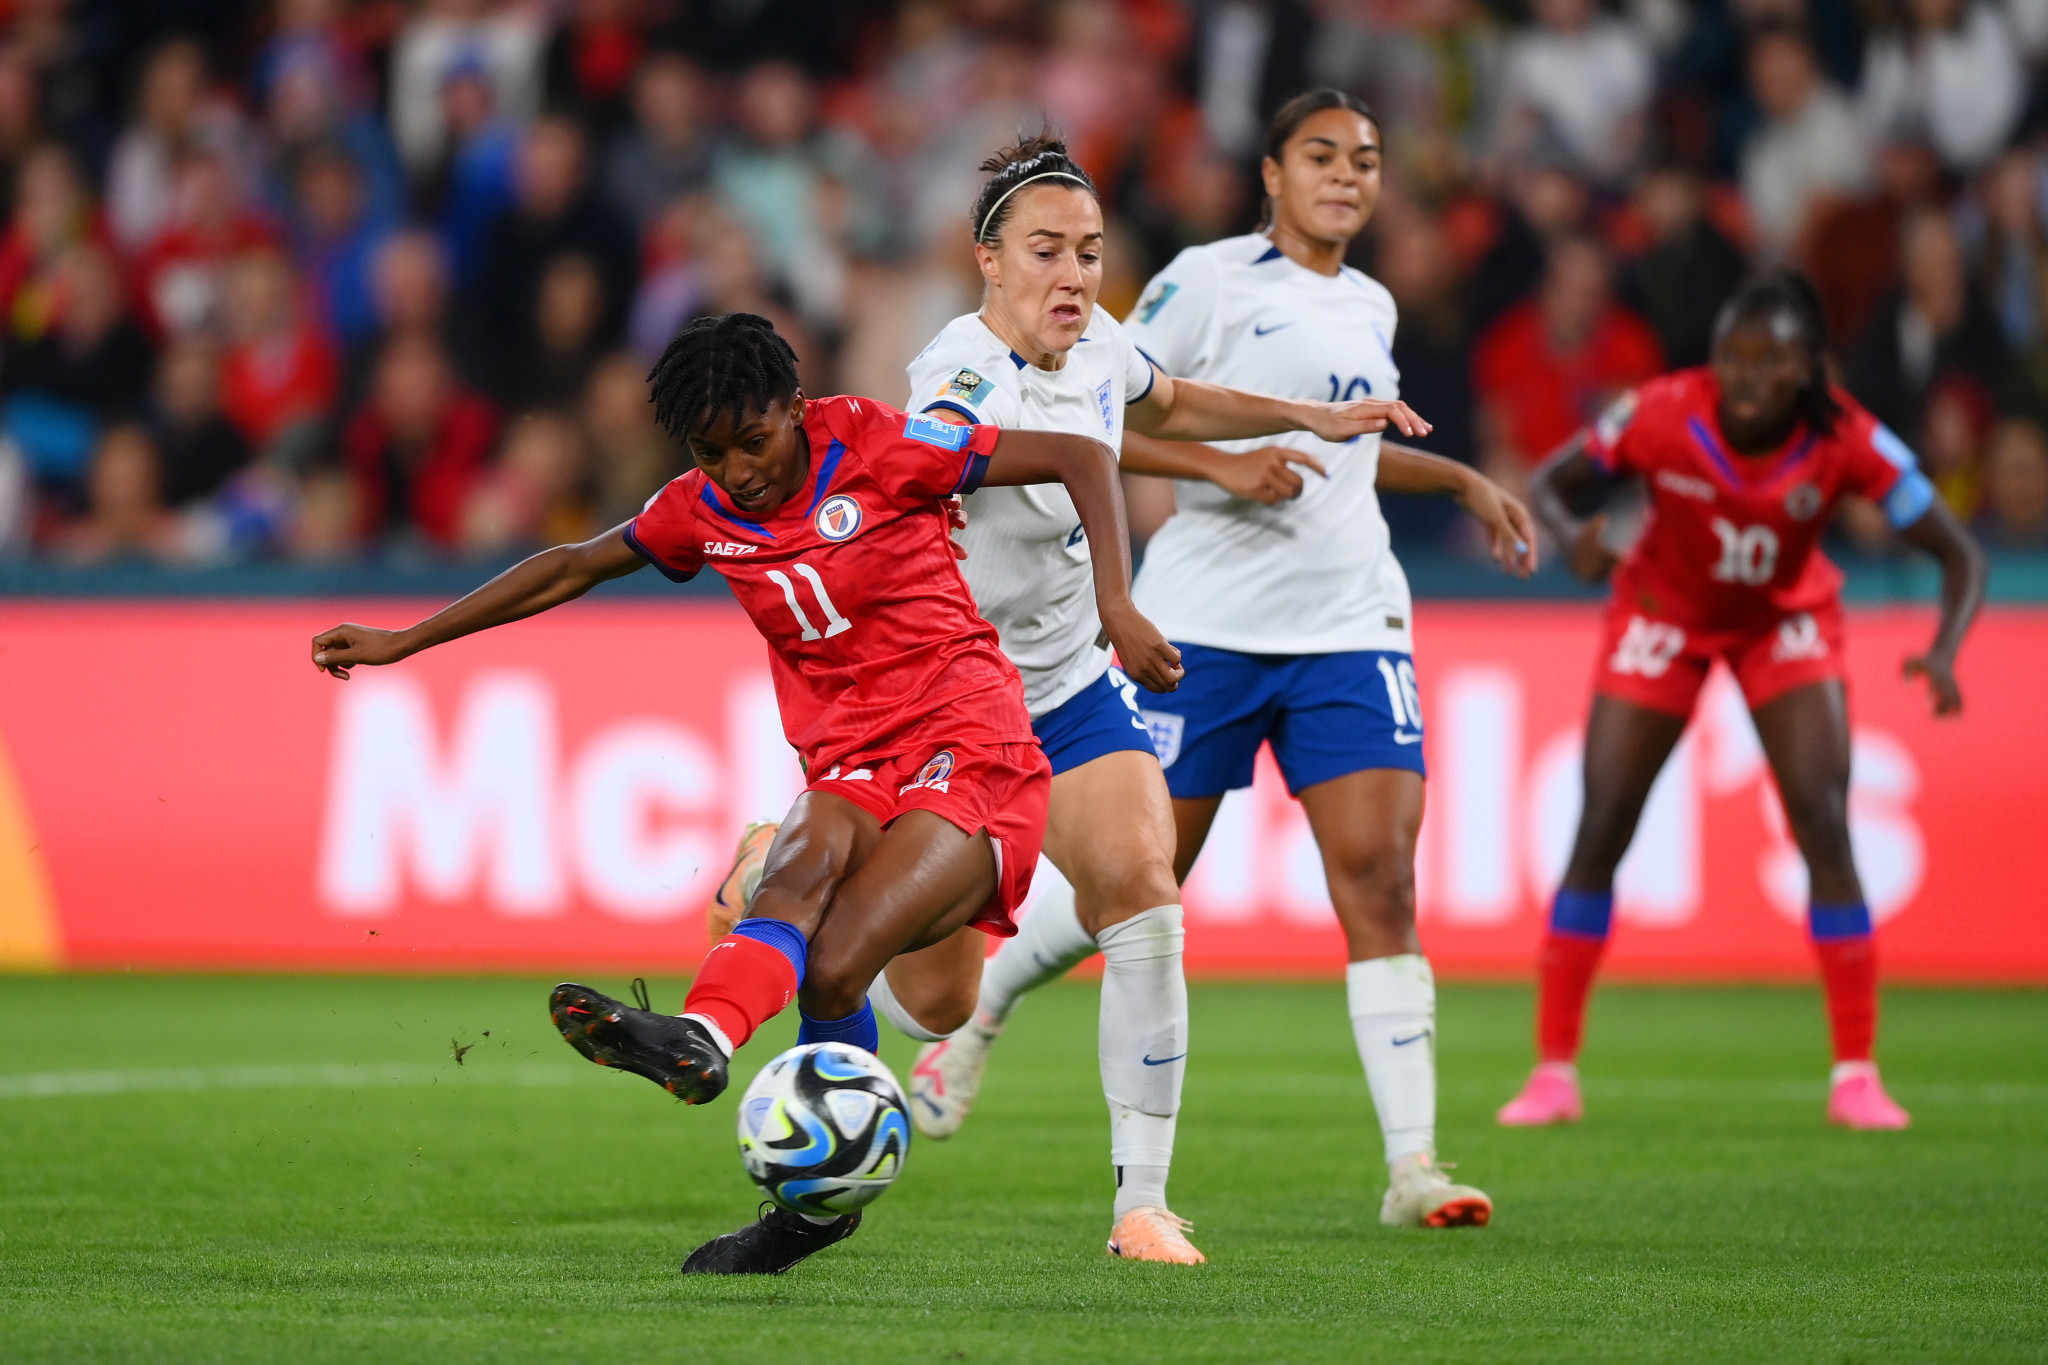 While England underwhelmed, world number 53-ranked side Haiti impressed on their tournament debut, and almost took a share of the spoils through a well-saved effort from Roseline Eloissaint, left ©Getty Images